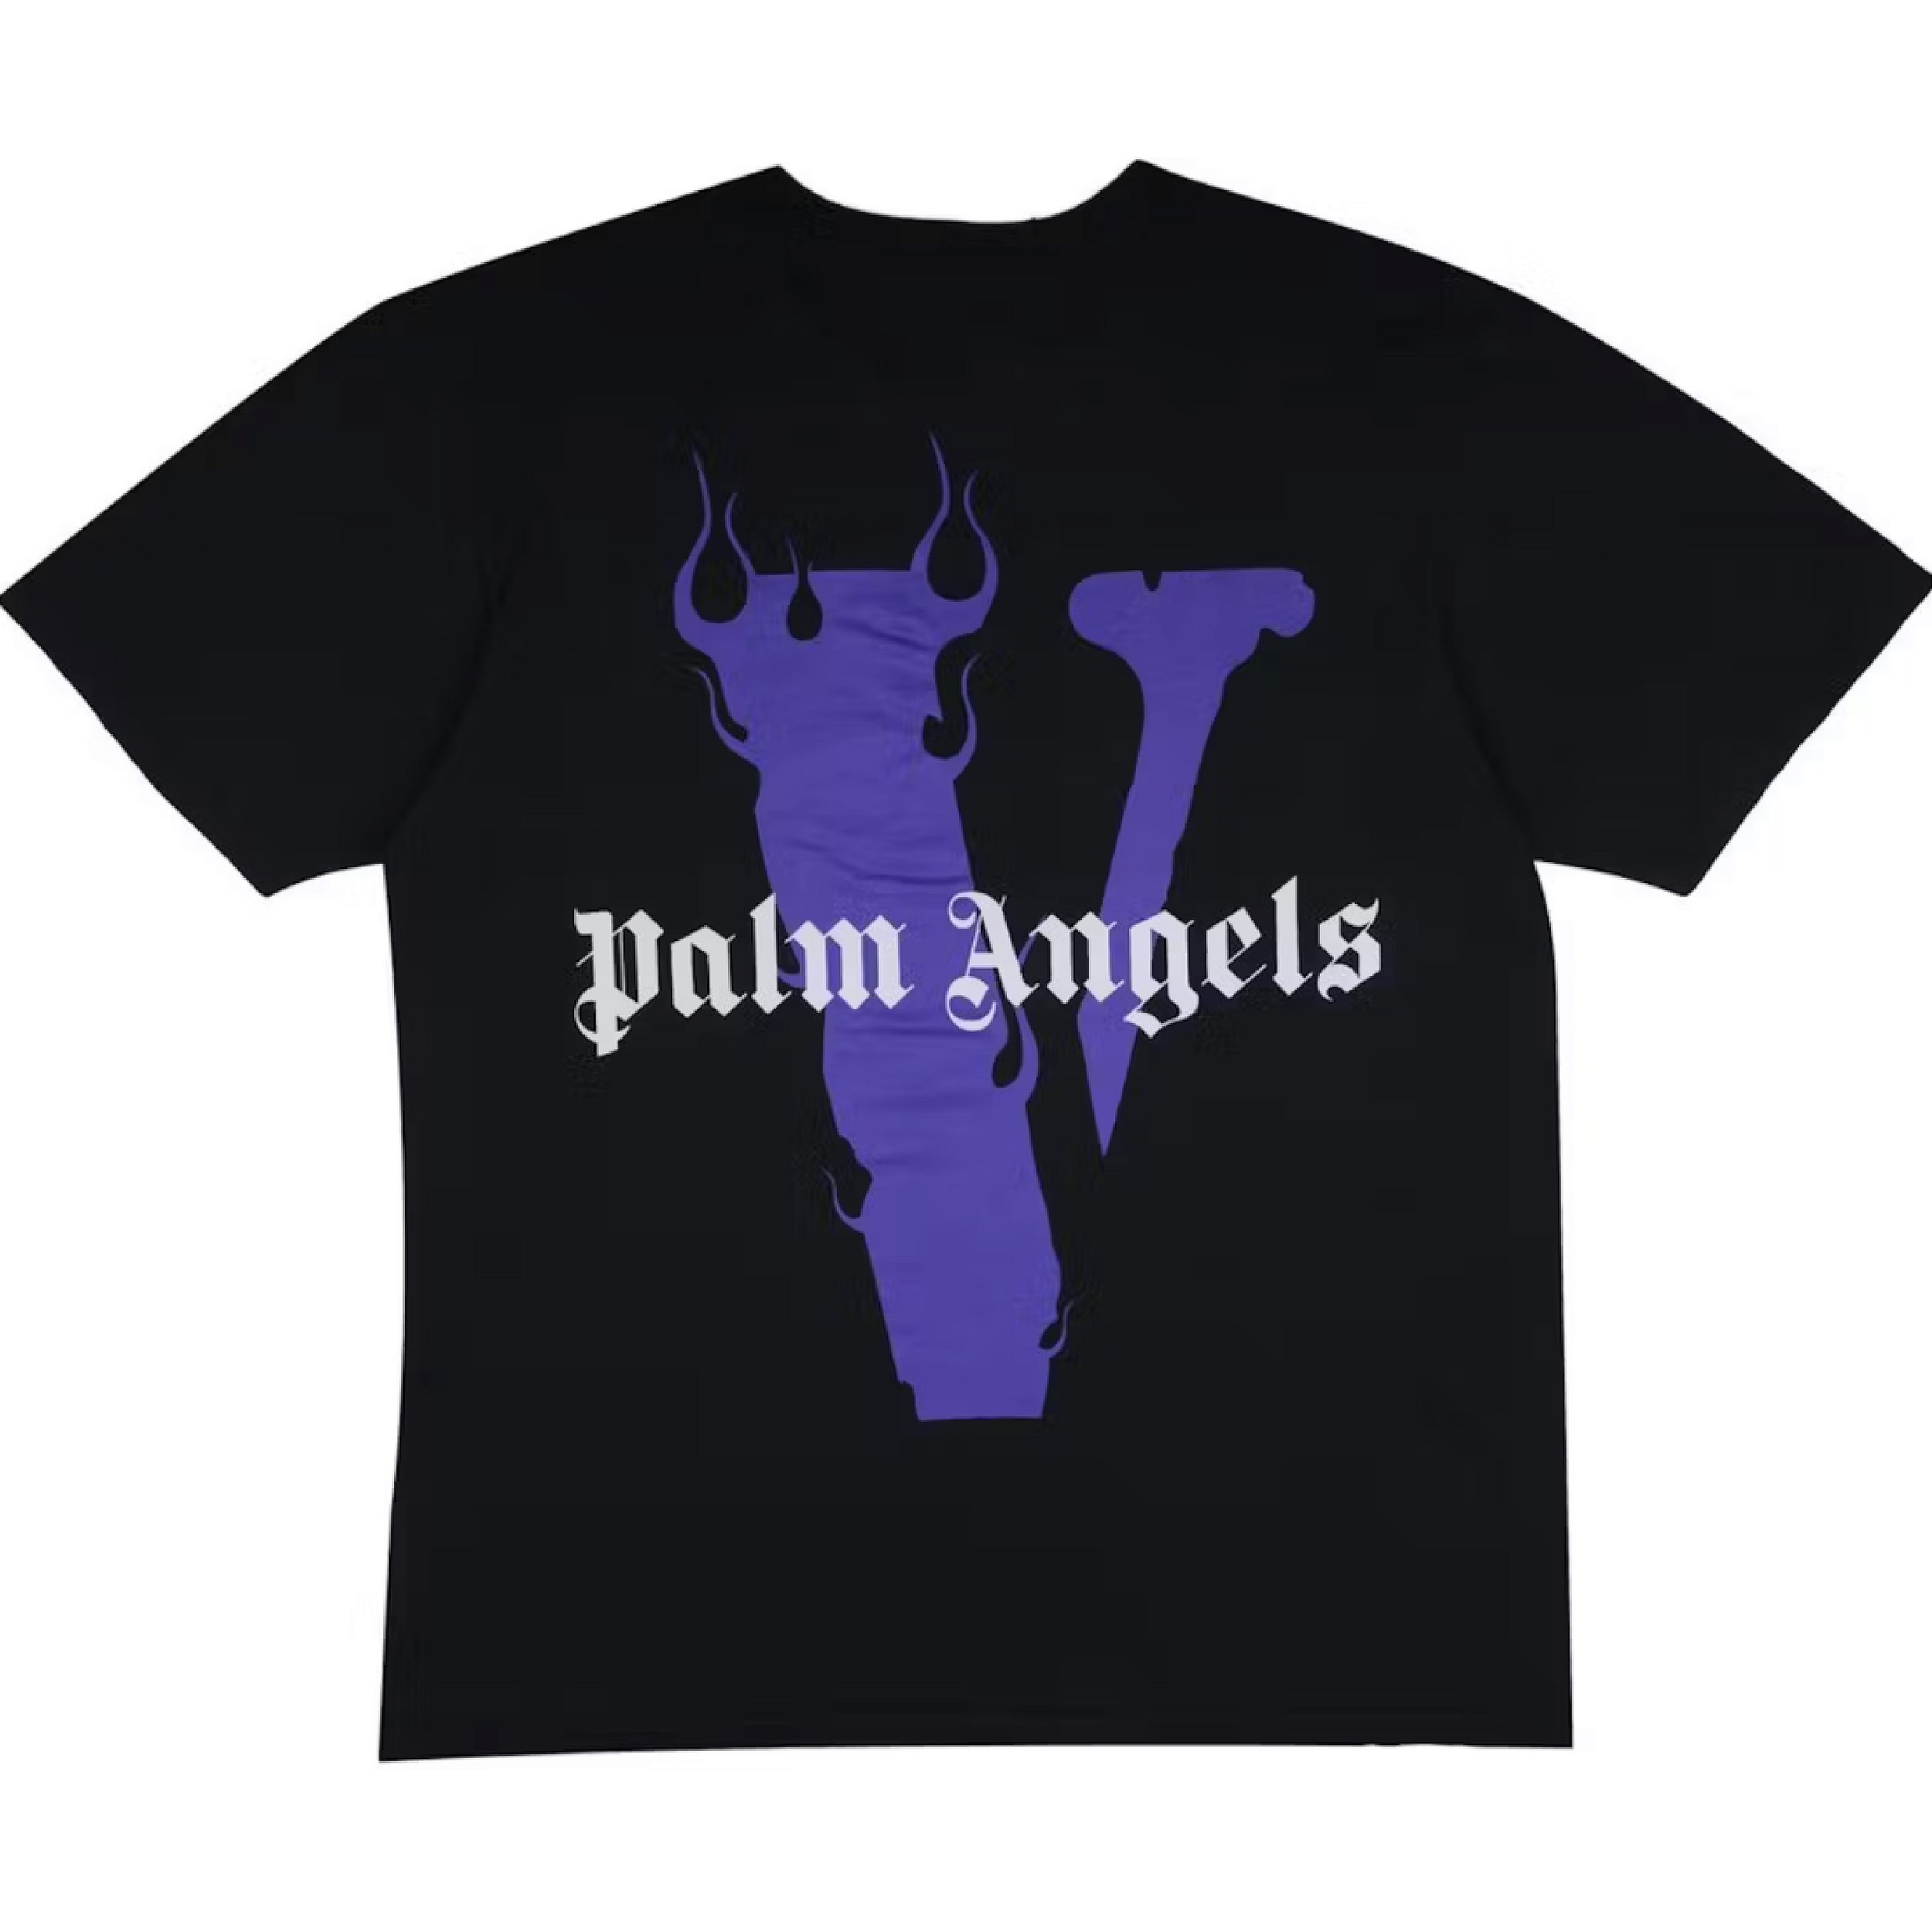 Palm Angels T-shirt in black